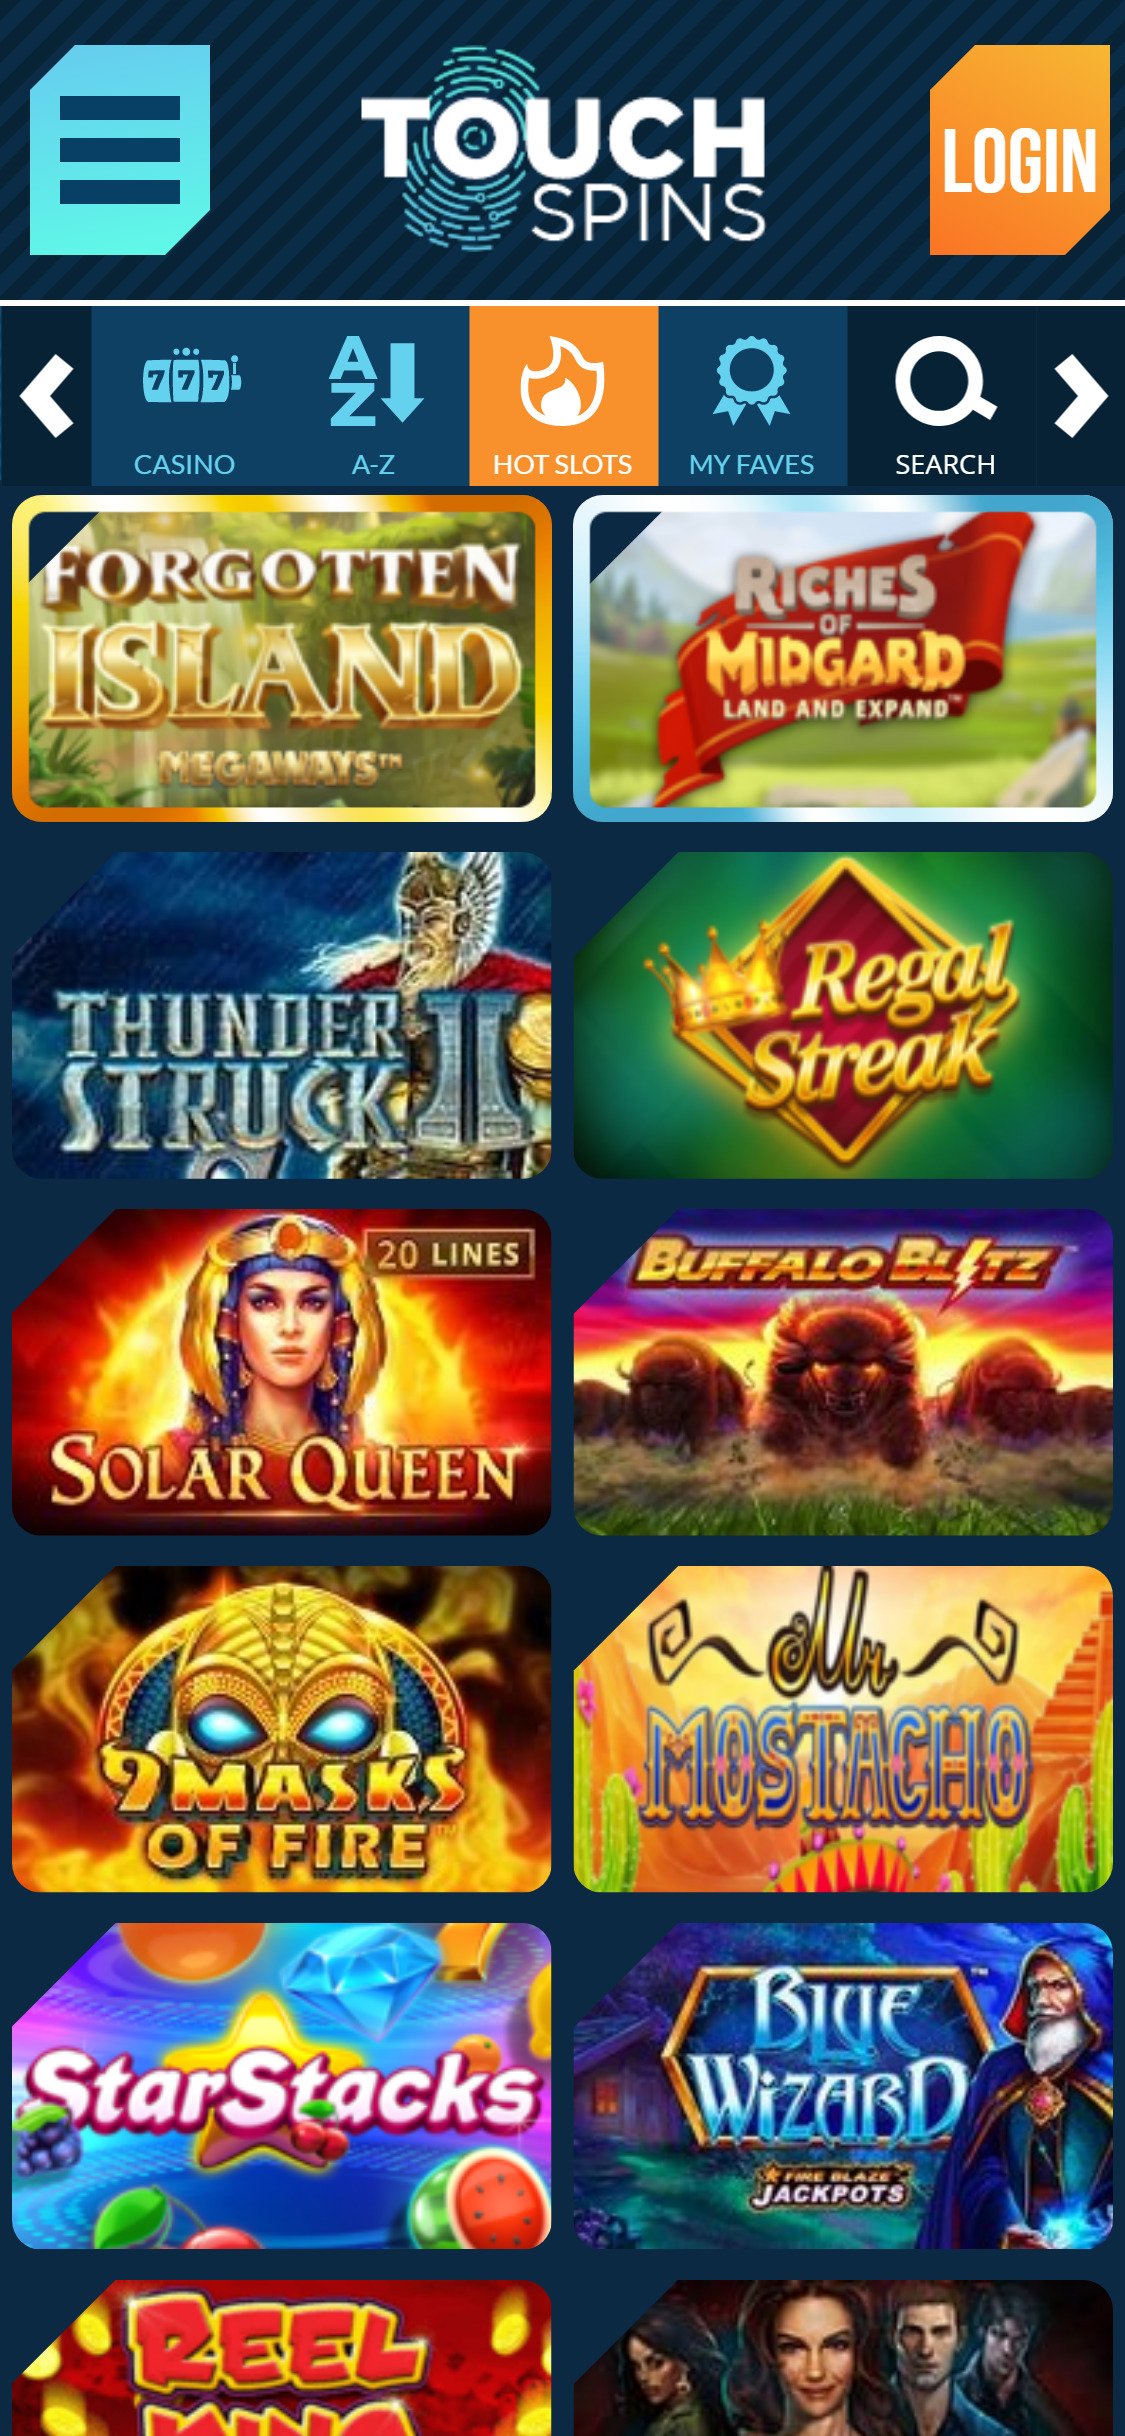 Touch Spins Casino Mobile Games Review